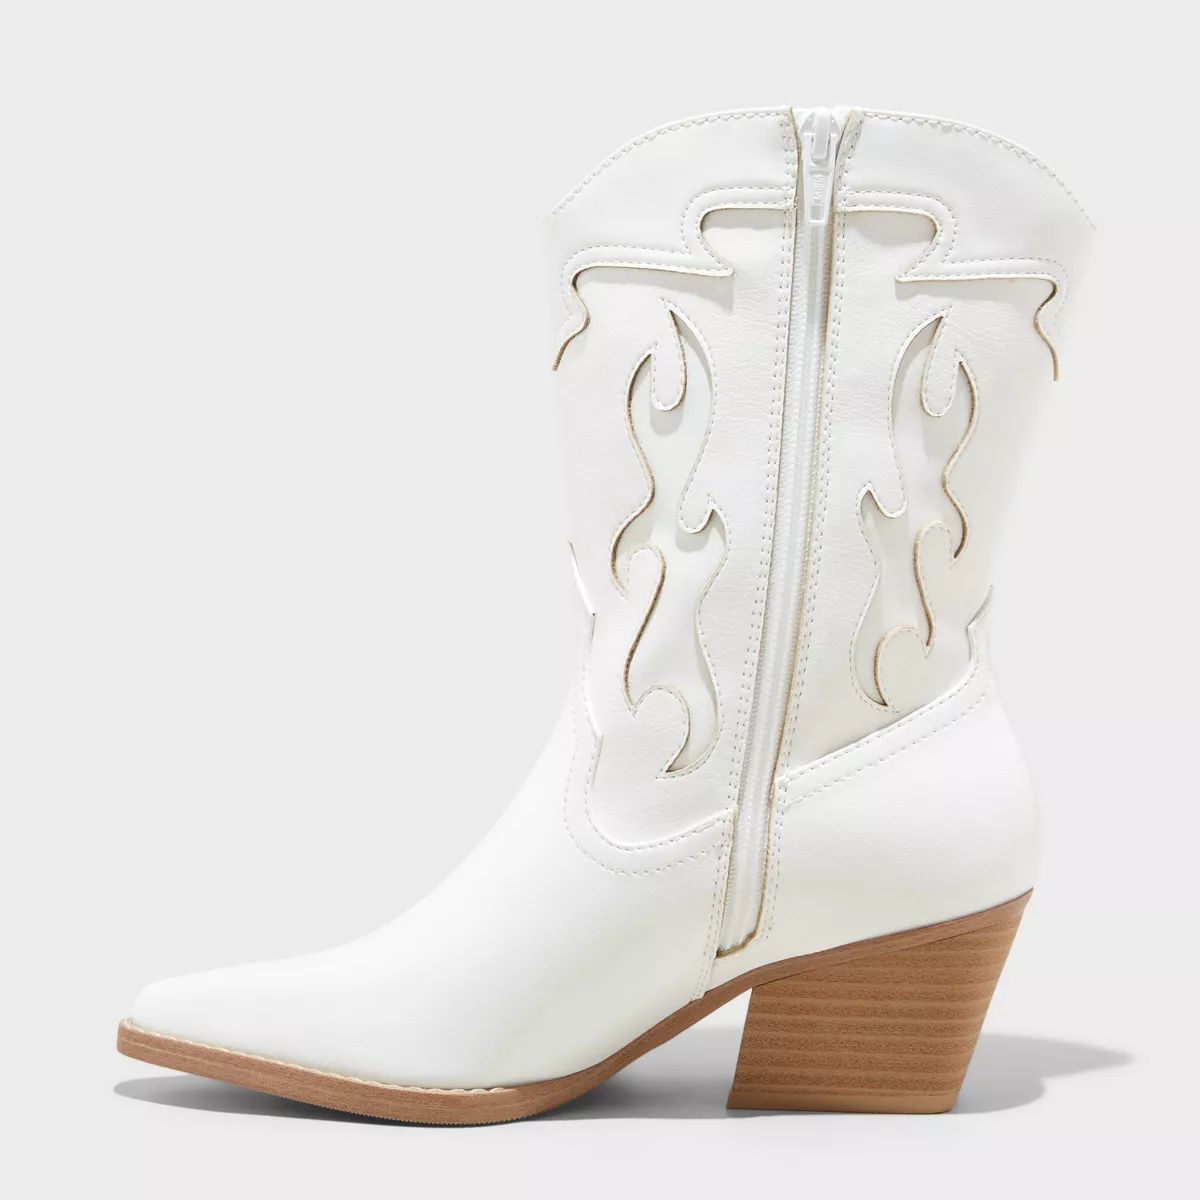 Women's Daytona Western Boots with Memory Foam Insole - Wild Fable™ White 5.5 | Target